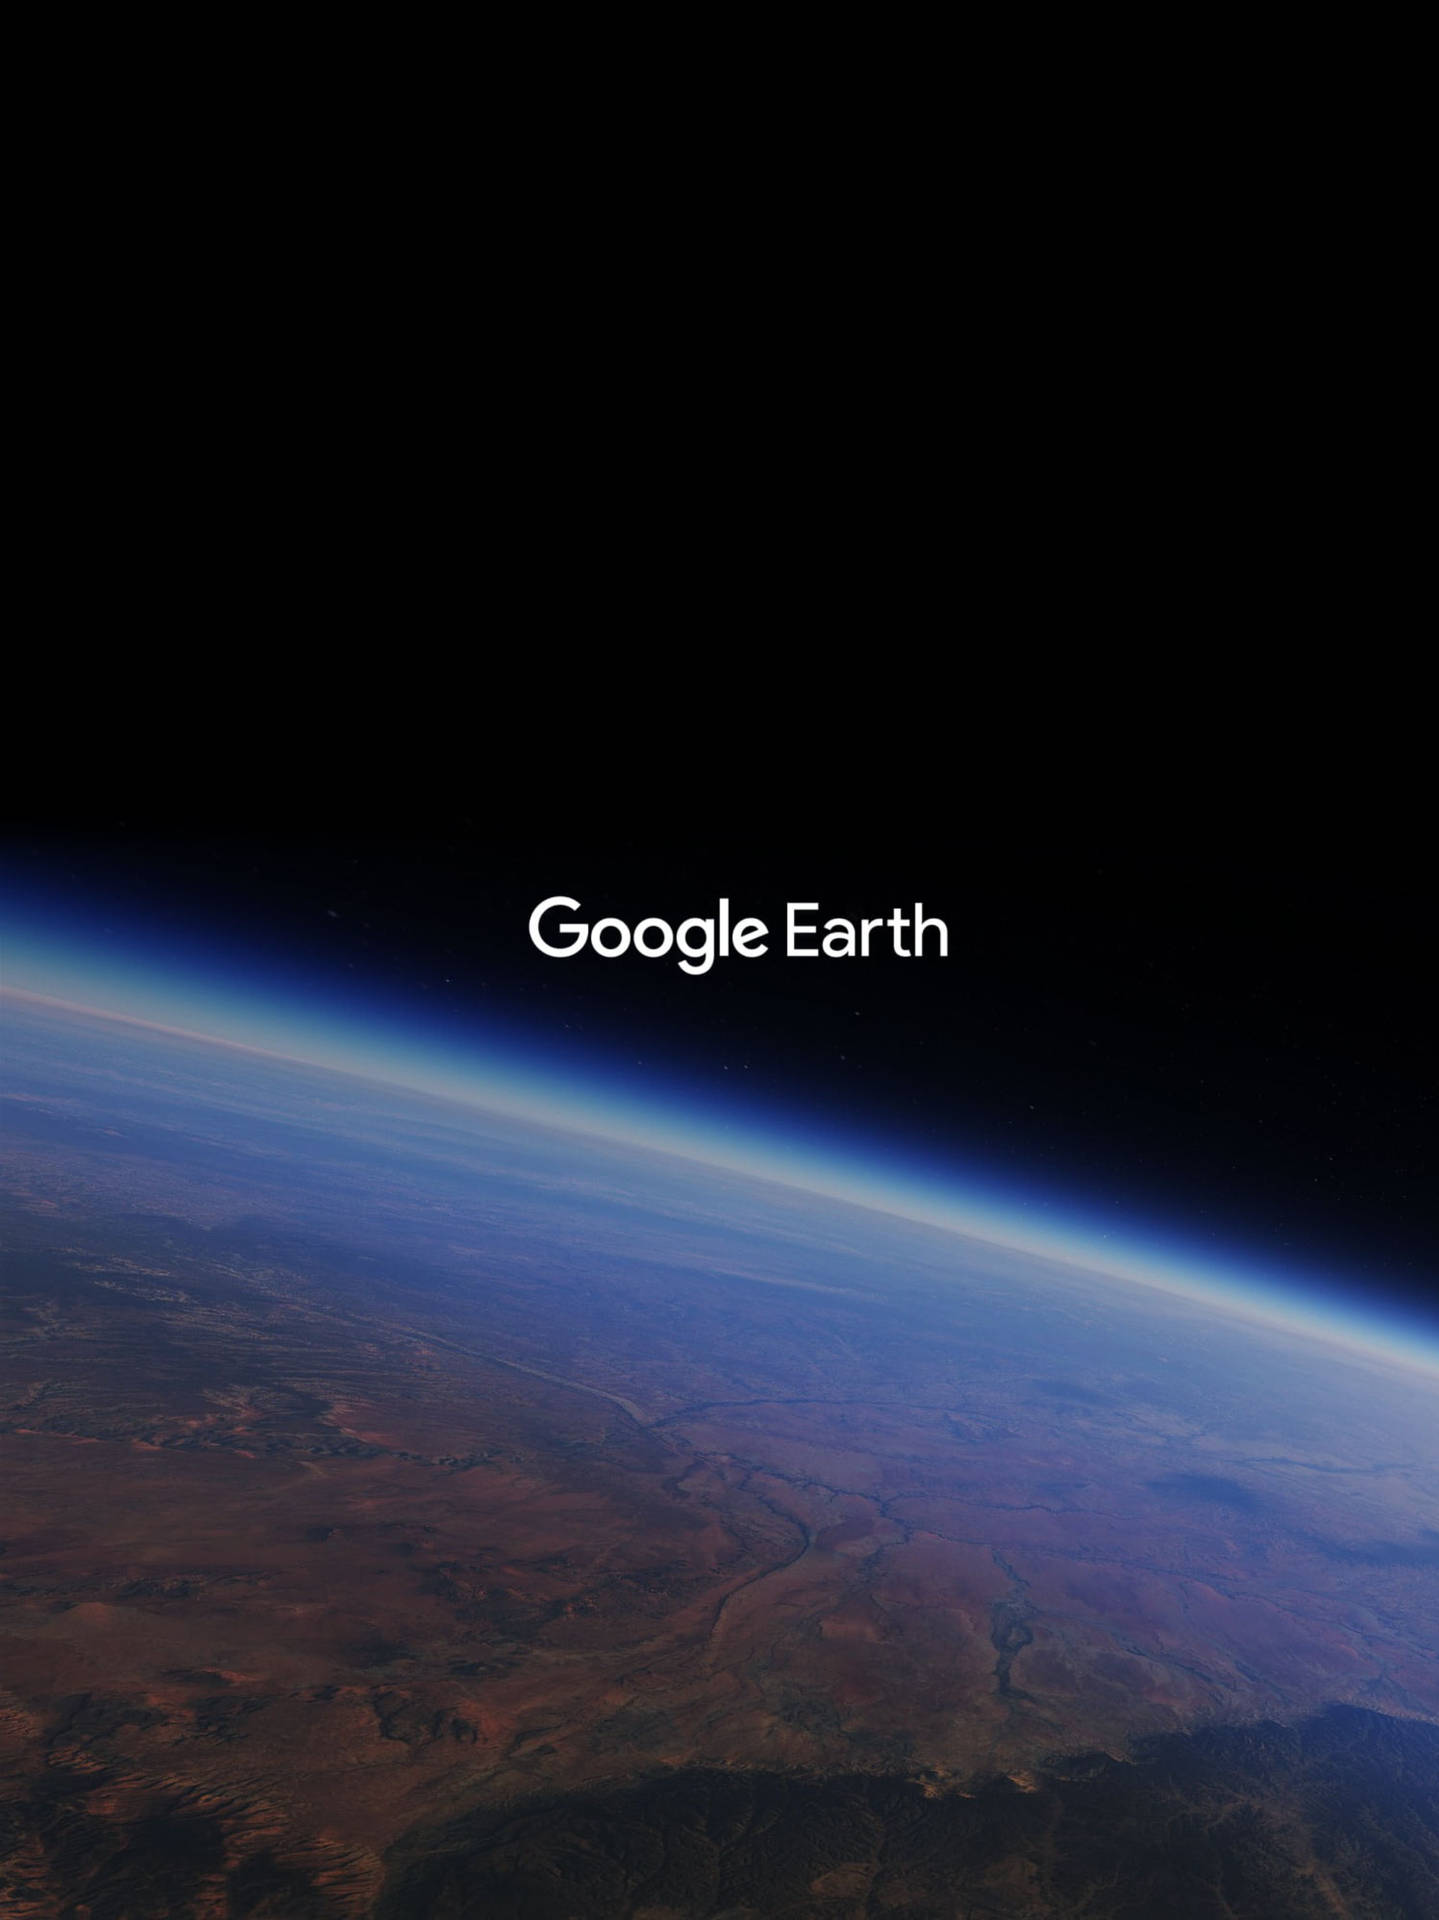 Google Earth In Outer Space Wallpaper